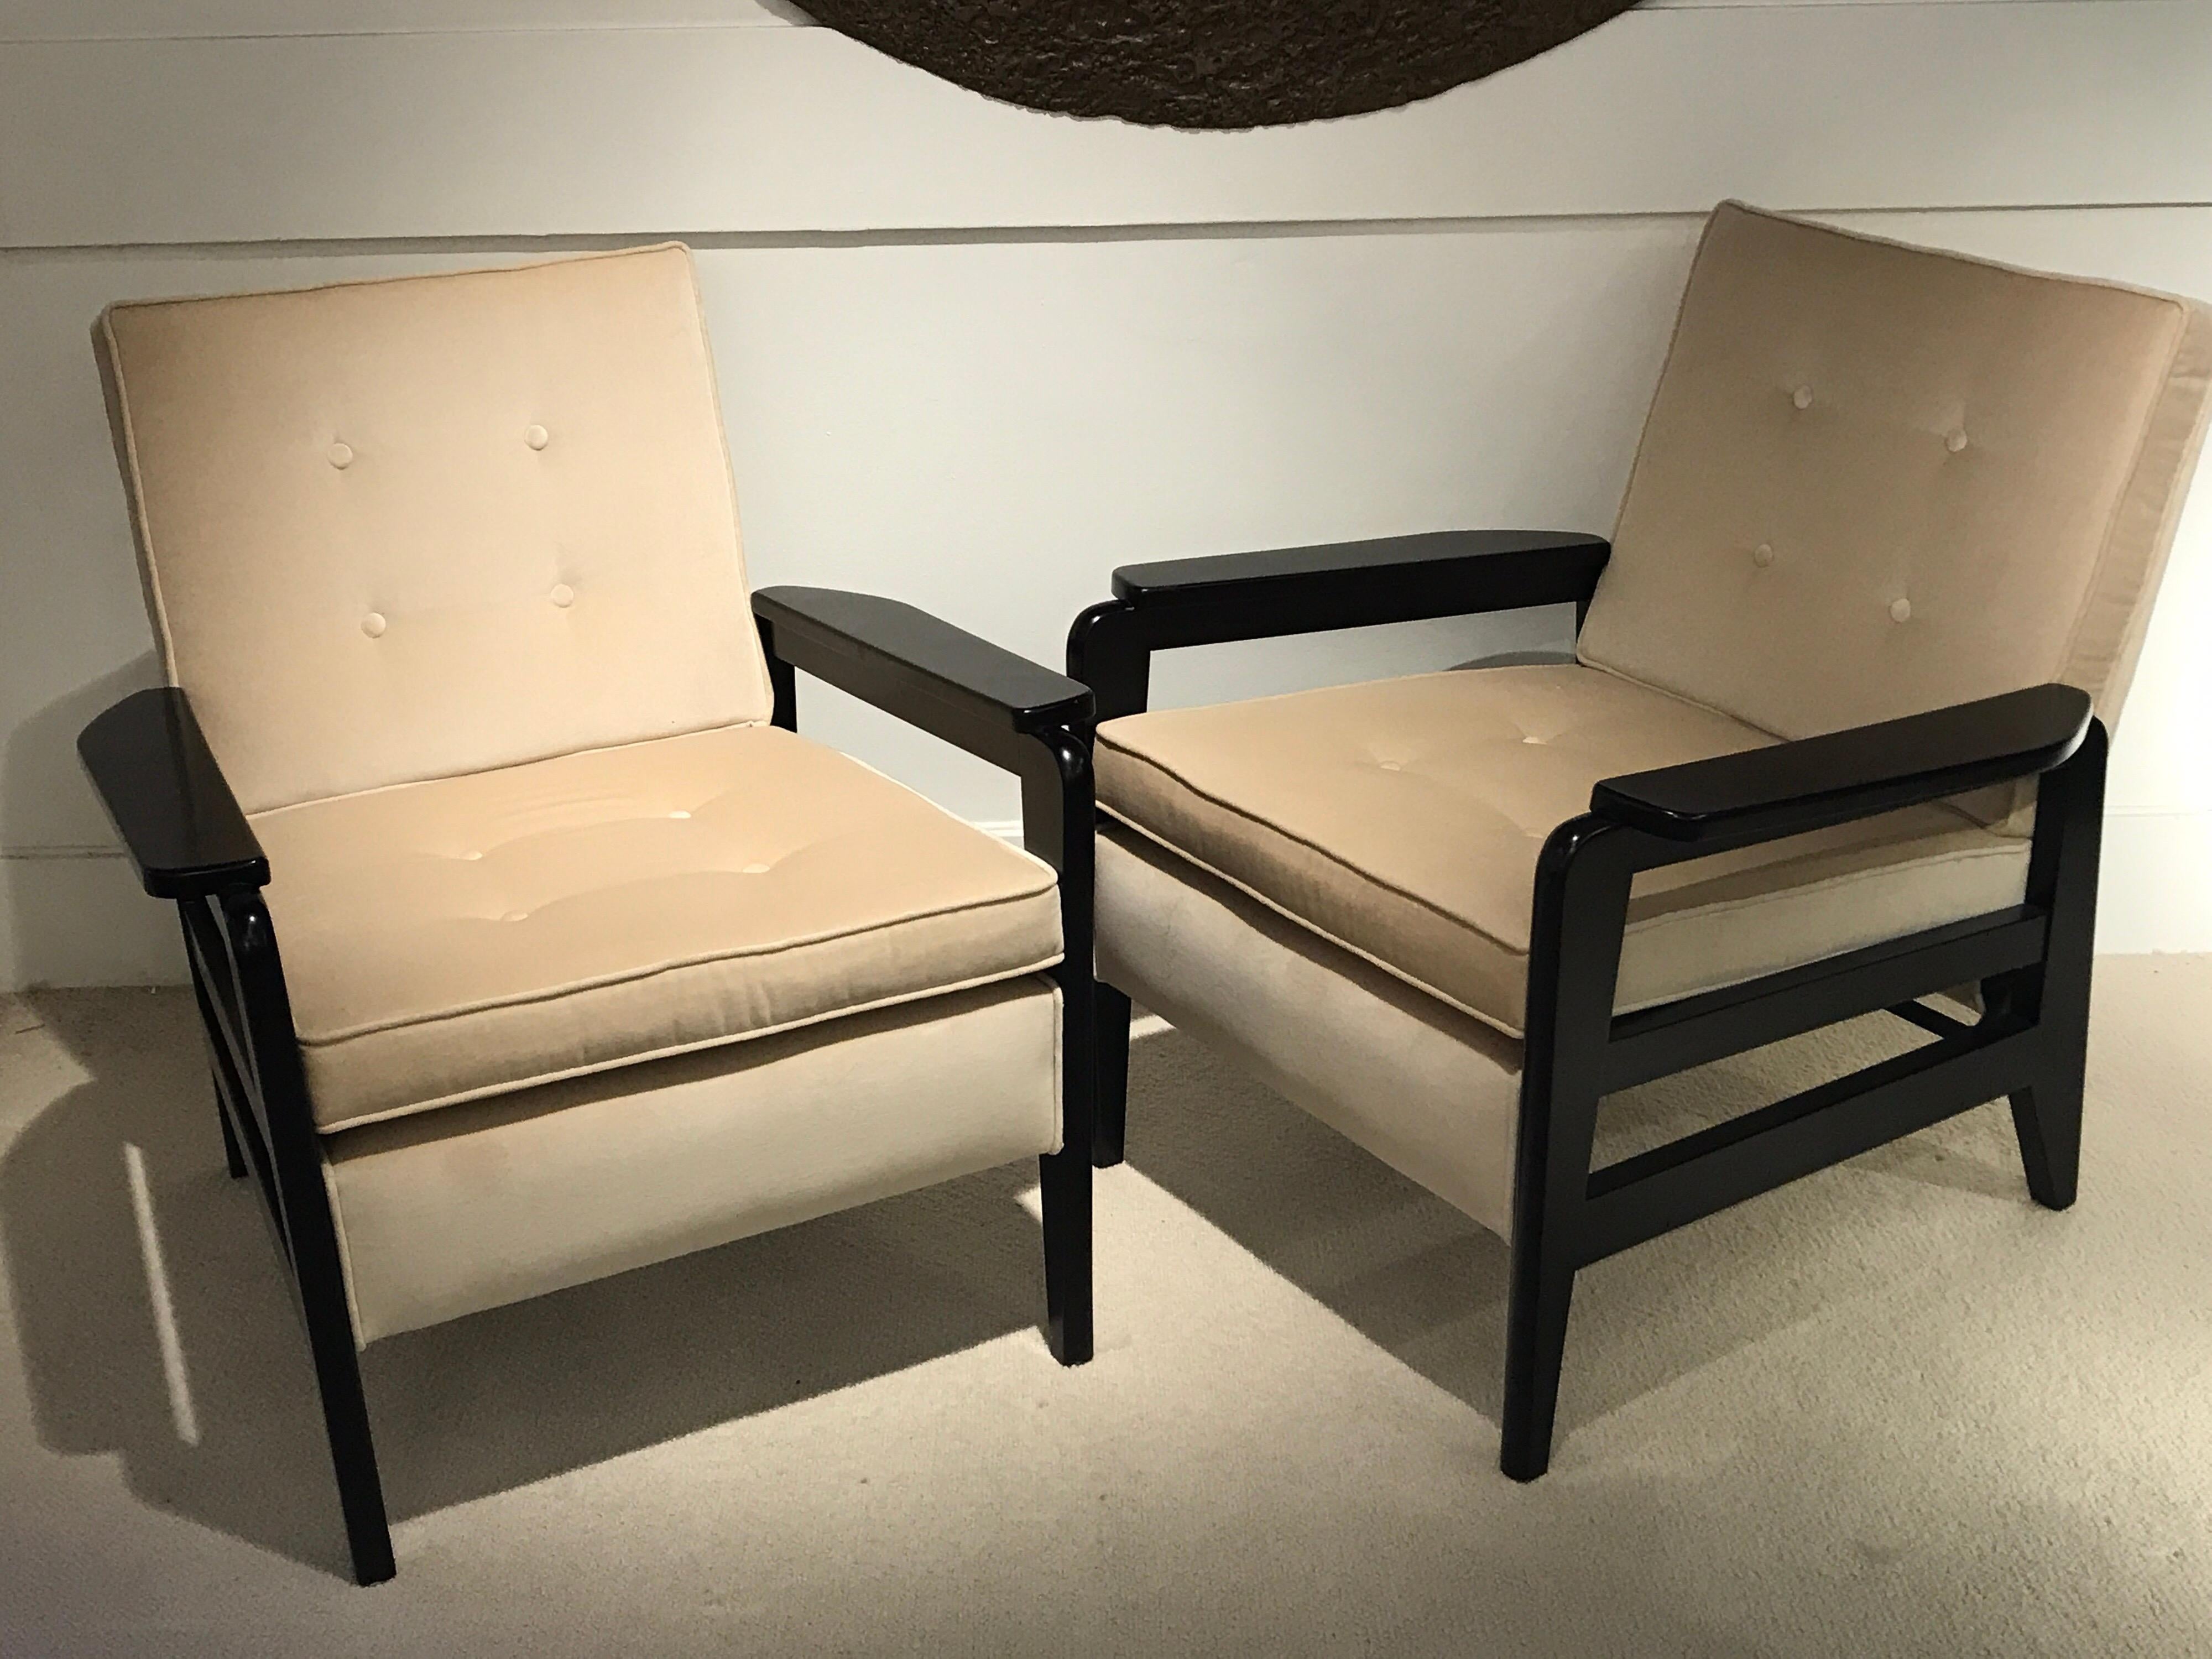 Pair of 1950s armchairs by Pierre Guariche.
Wood has been Relaquered.
Reuphostered.